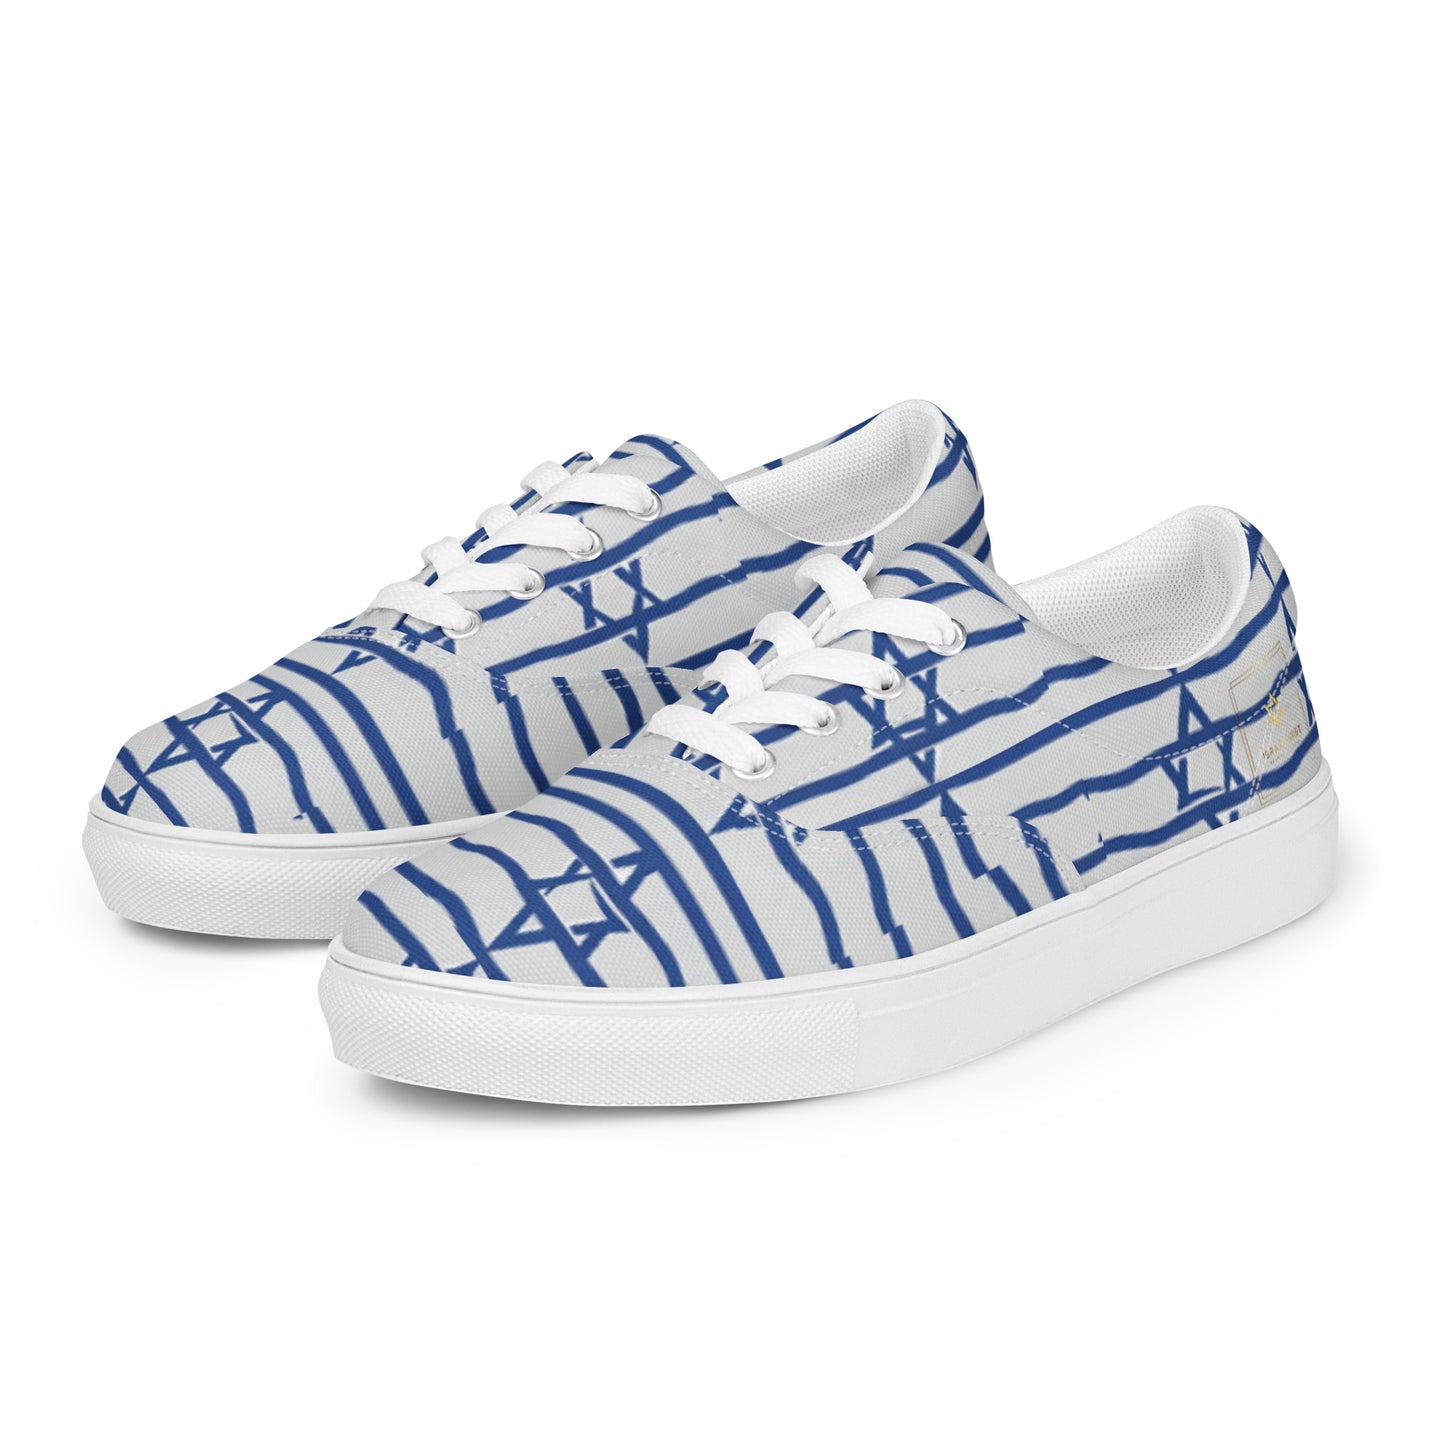 Sneakers in Israeli colors in canvas with laces